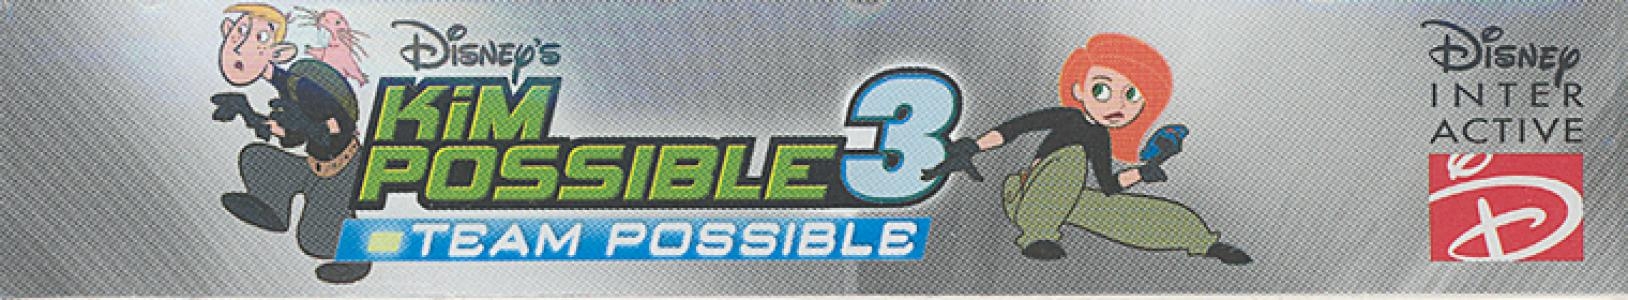 Banner Kim Possible 3 Team Possible